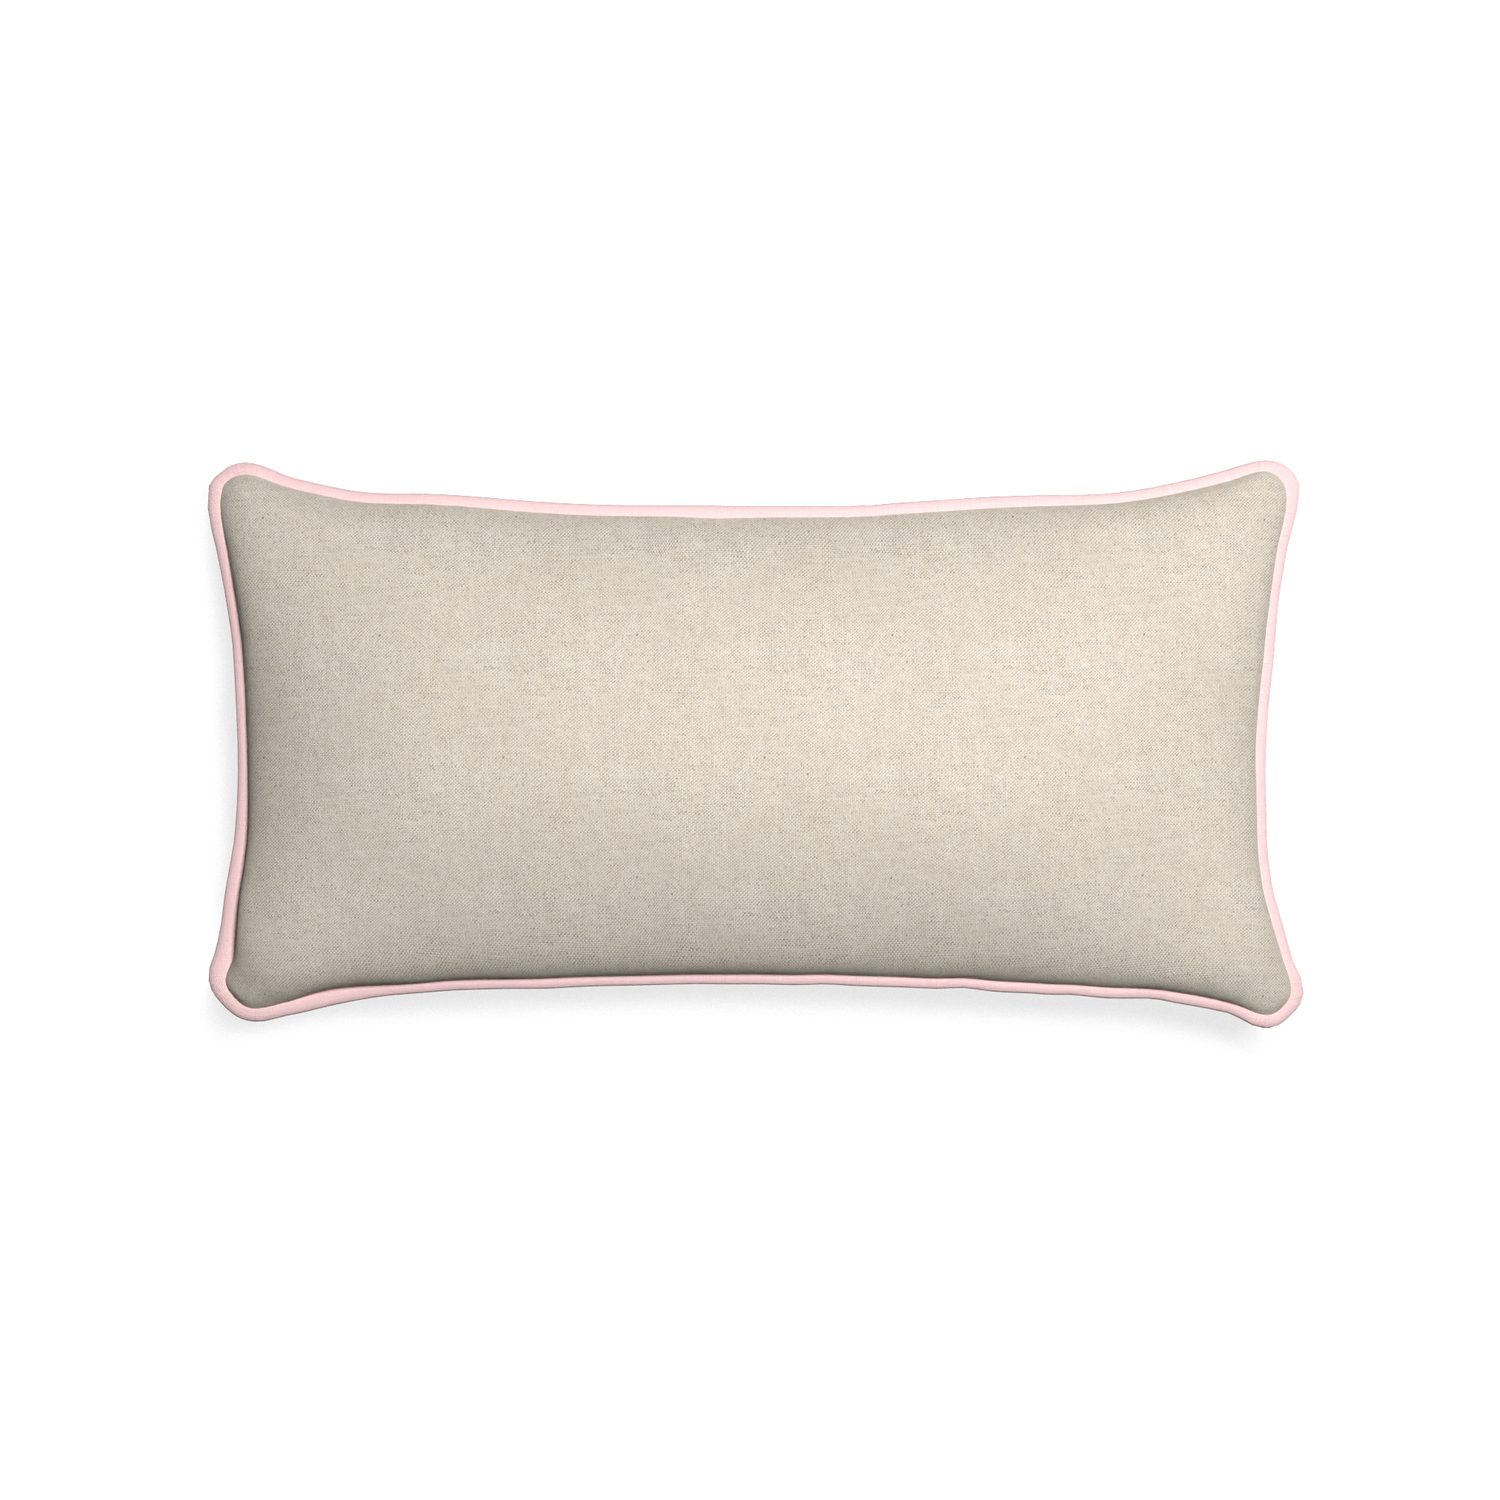 Midi-lumbar oat custom light brownpillow with petal piping on white background